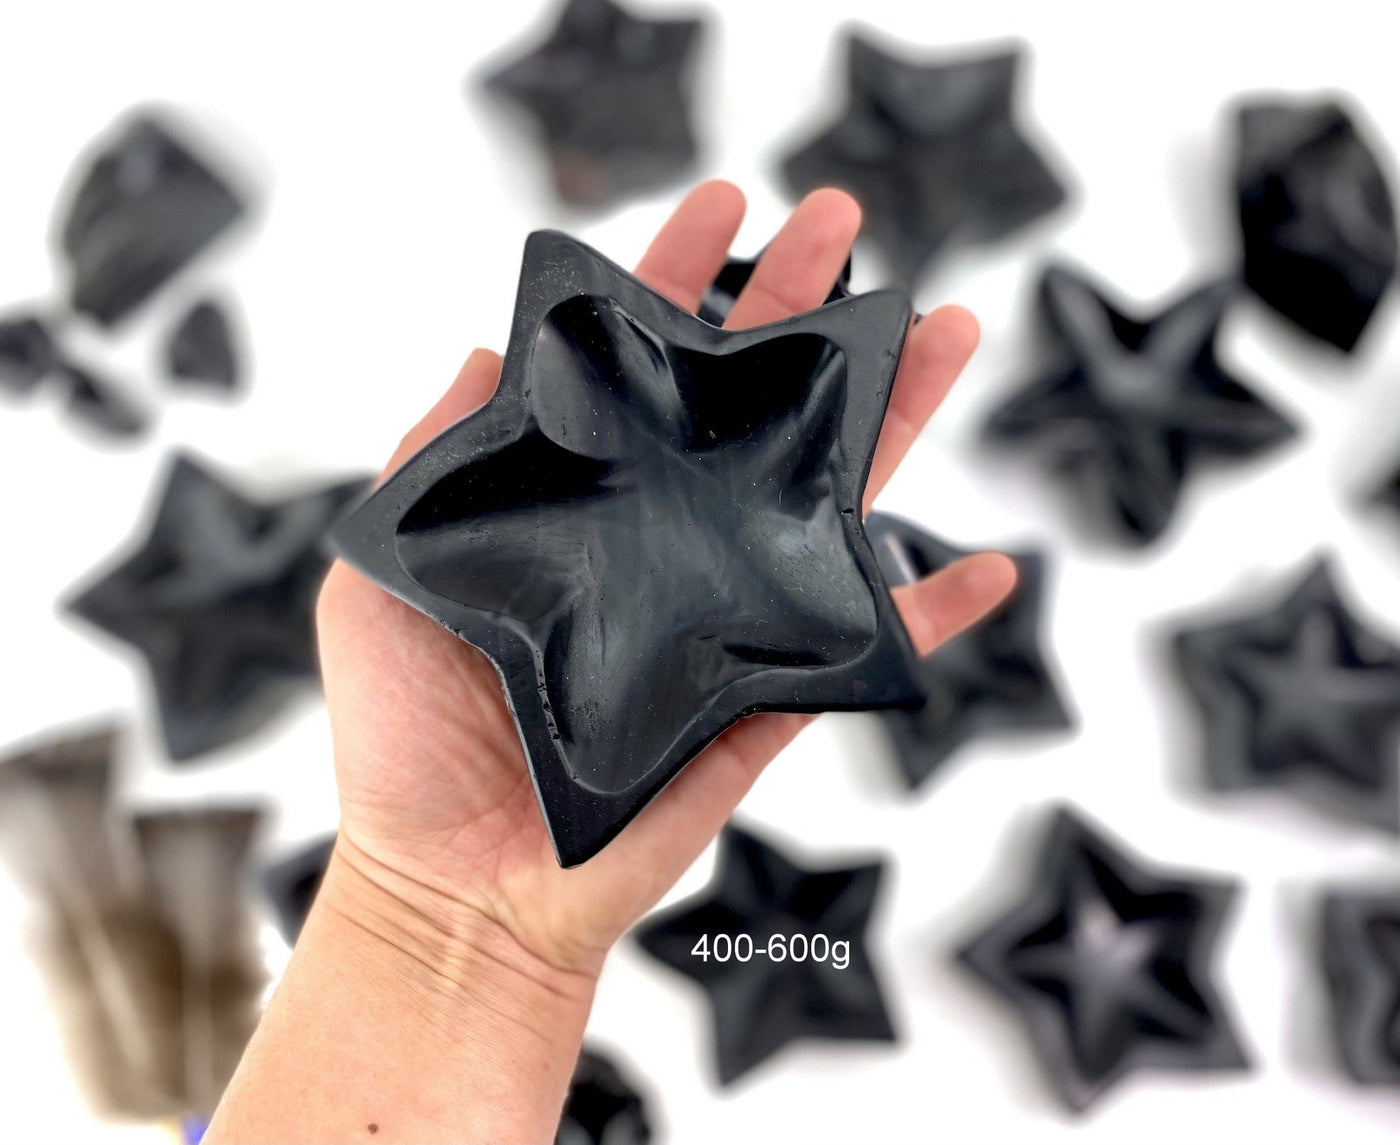 Black Obsidian Stone Star Dish in a hand sowing size 400-600g size, with others in the backbround